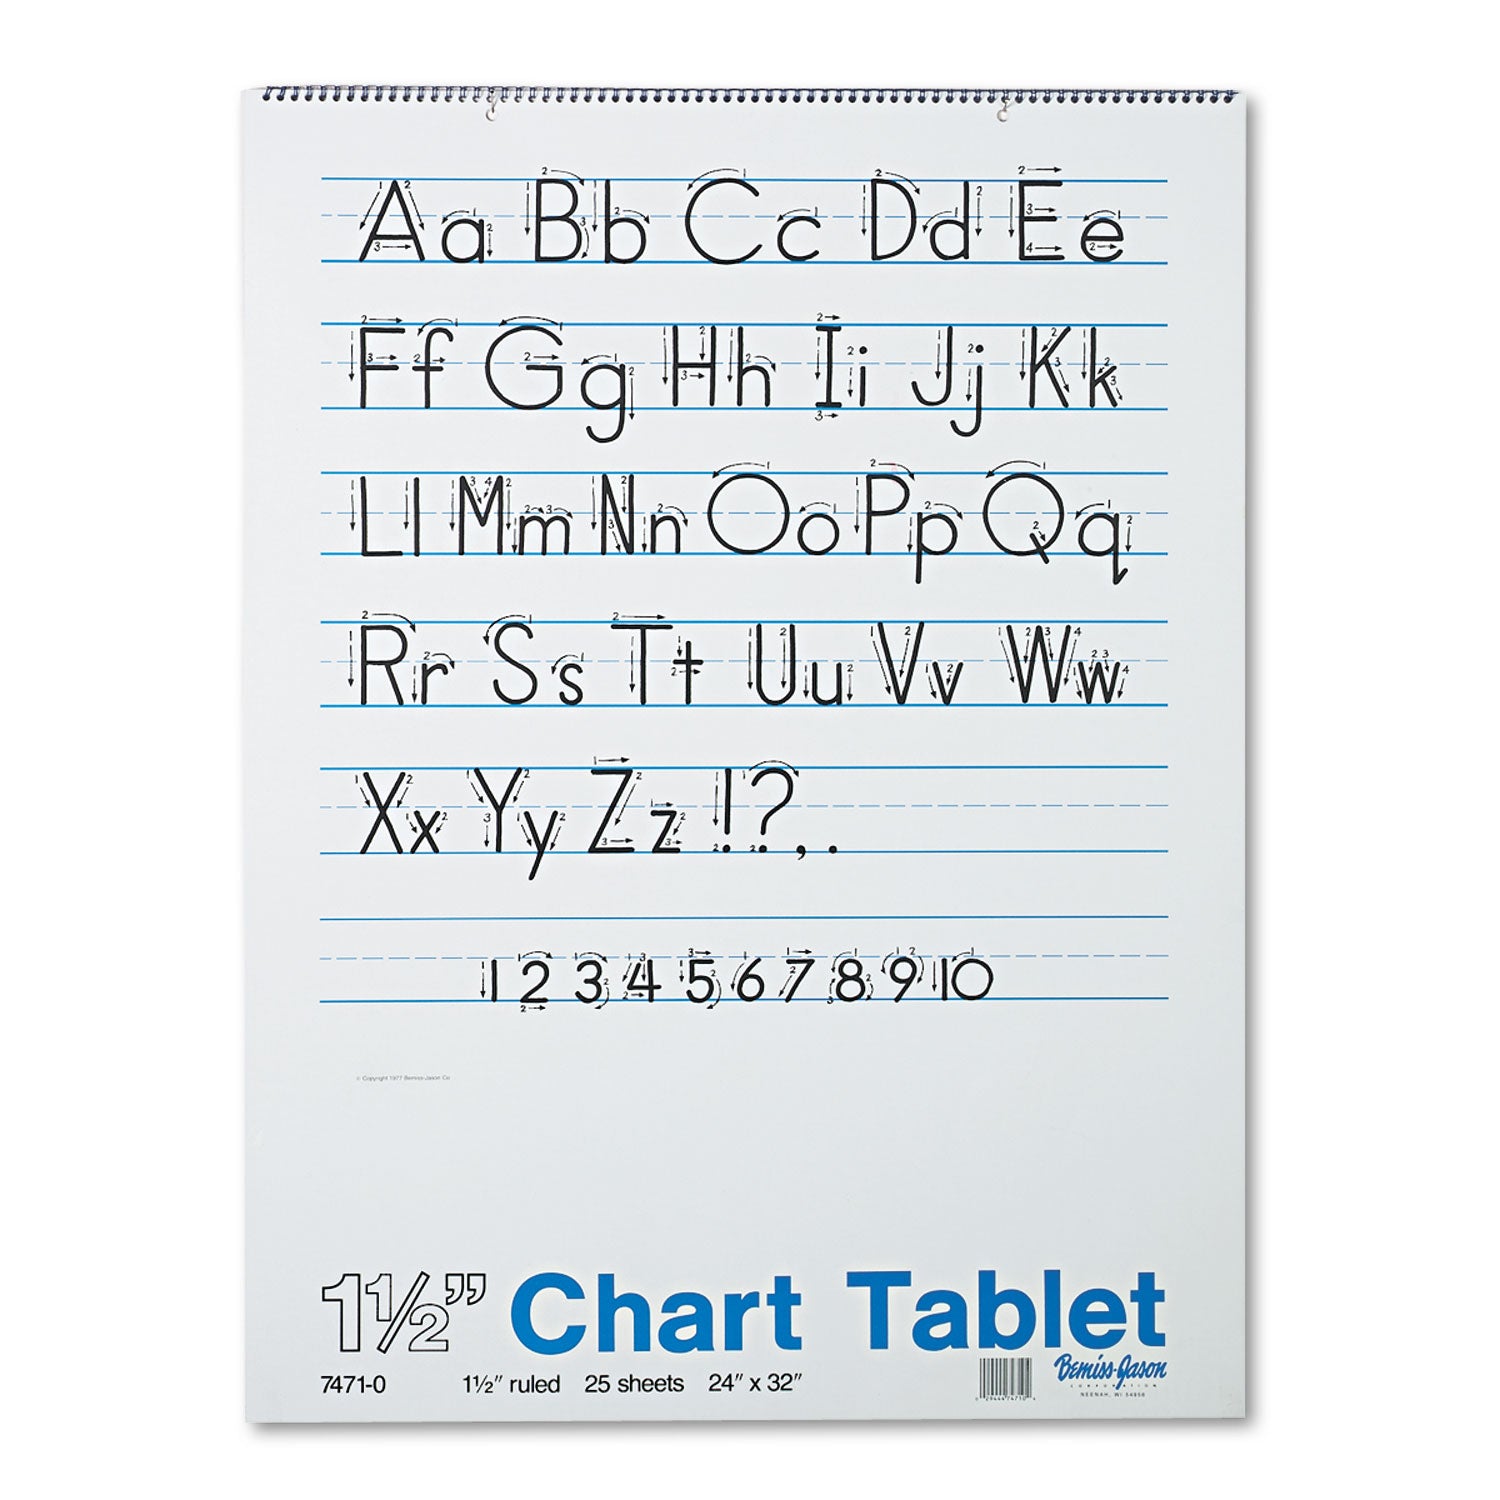 Chart Tablets, Presentation Format (1.5" Rule), 24 x 32, White, 25 Sheets - 